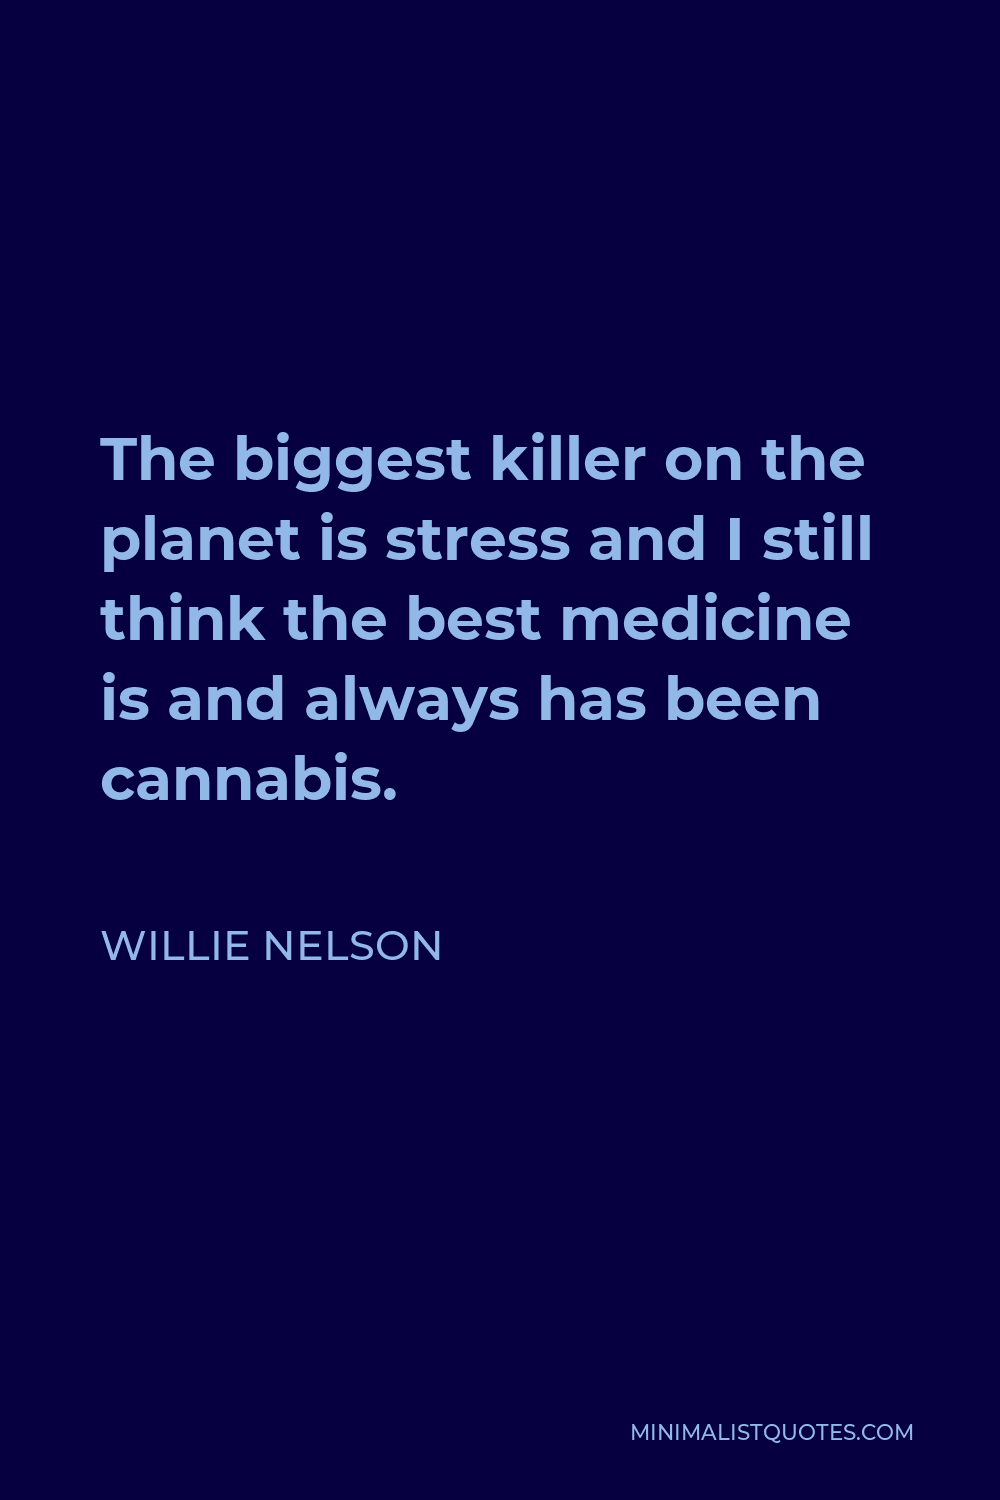 Willie Nelson Quote - The biggest killer on the planet is stress and I still think the best medicine is and always has been cannabis.